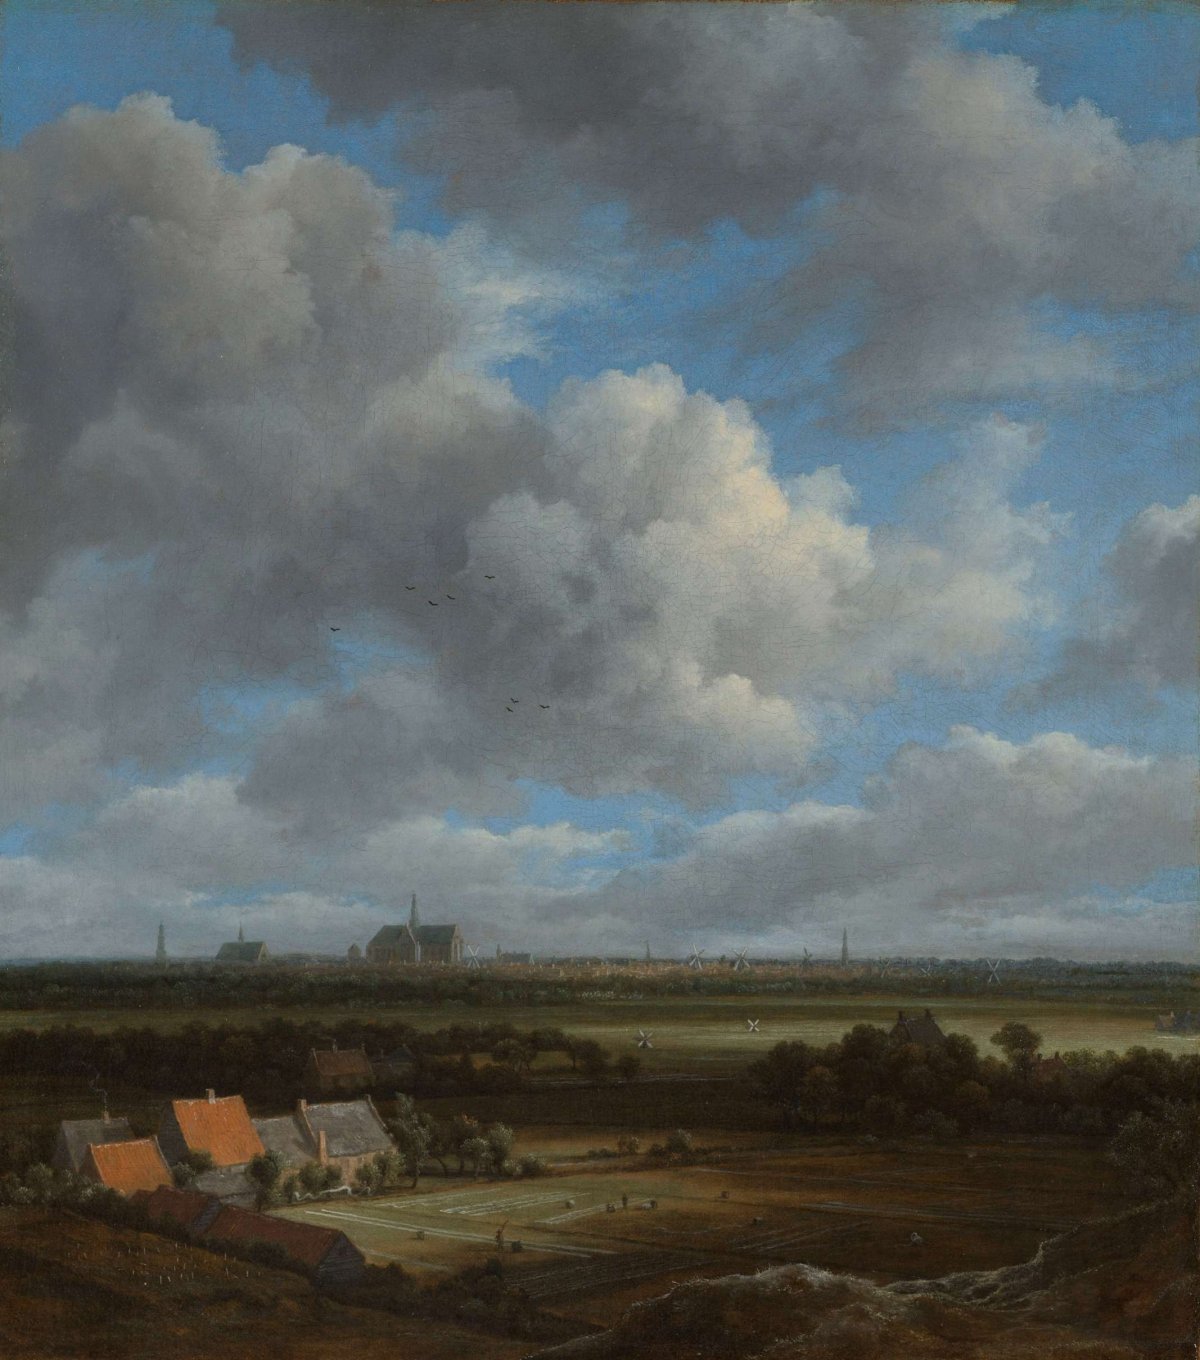 View of Haarlem from the Northwest, with the Bleaching Fields in the Foreground, Jacob Isaacksz van Ruisdael, c. 1650 - c. 1682